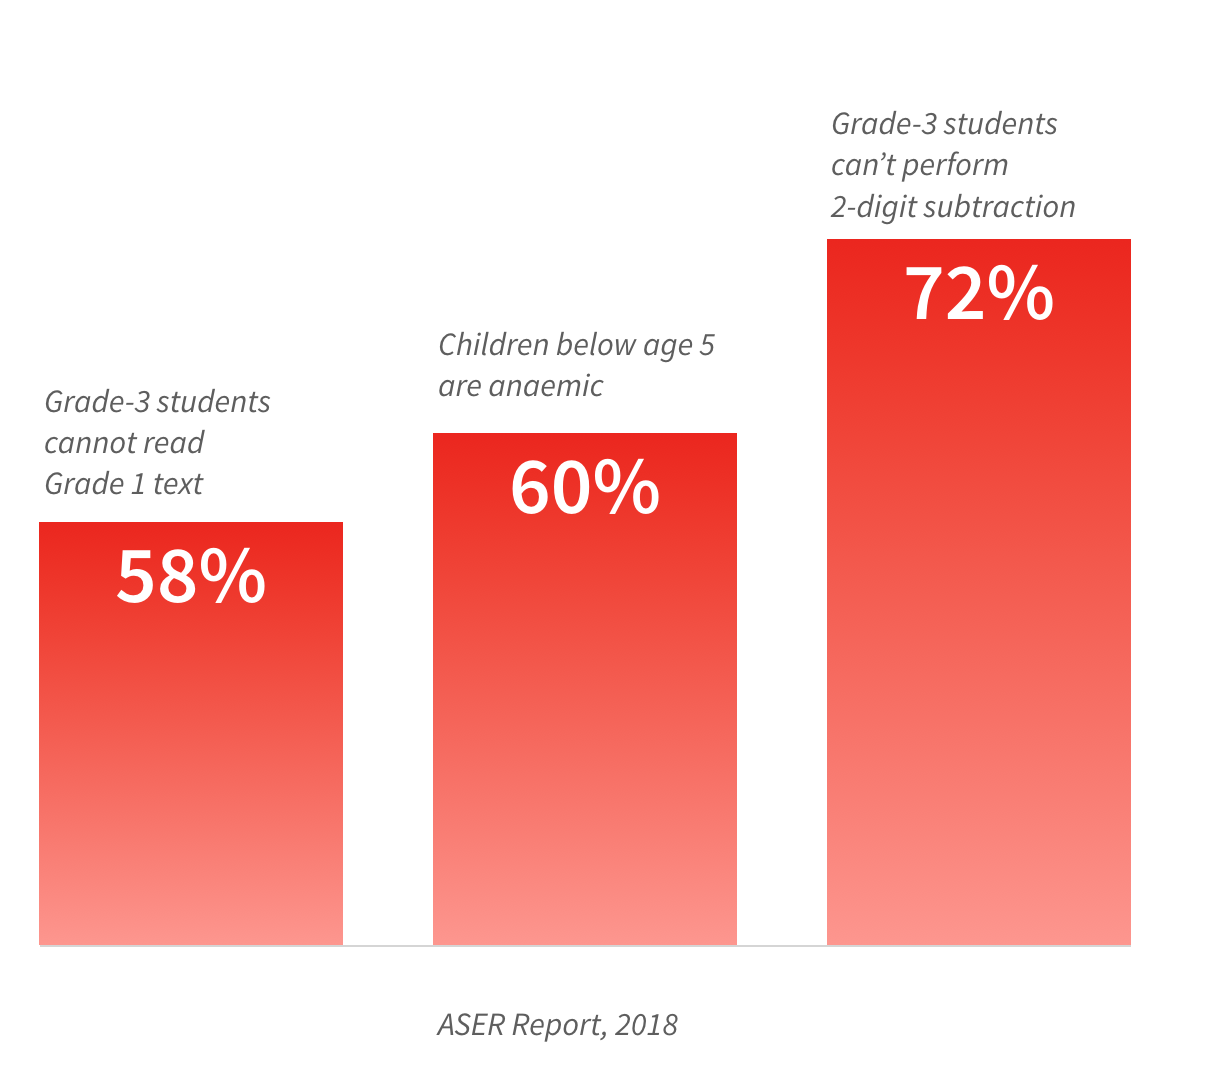 According to an ASER Report from 2018: 58% of grade 3 students cannot read grade 1 text, 60% children below the age of 5 are anaemic and 72% of grade 3 students cannot perform 2-digit subtraction.